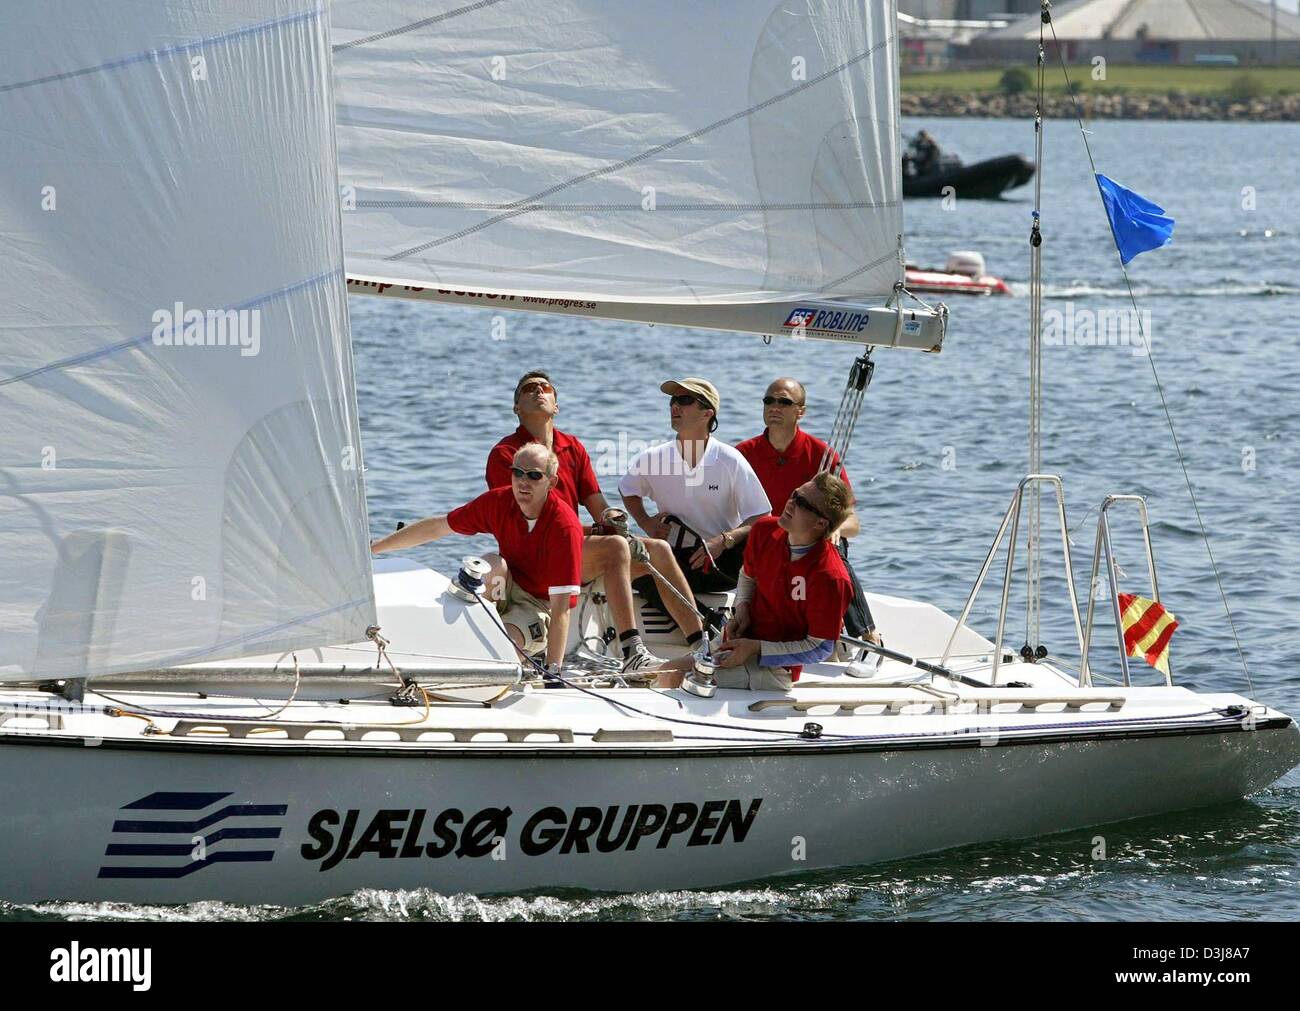 (dpa) - Crown prince Frederik of Denmark (C) sails with his crew during a sailing regatta in the harbour of Copenhagen, Denmark, 9 May 2004. Frederik and Mary Donaldson, his finacee, were competing with each other in a sailing regatta which was eventually won by Mary. Stock Photo